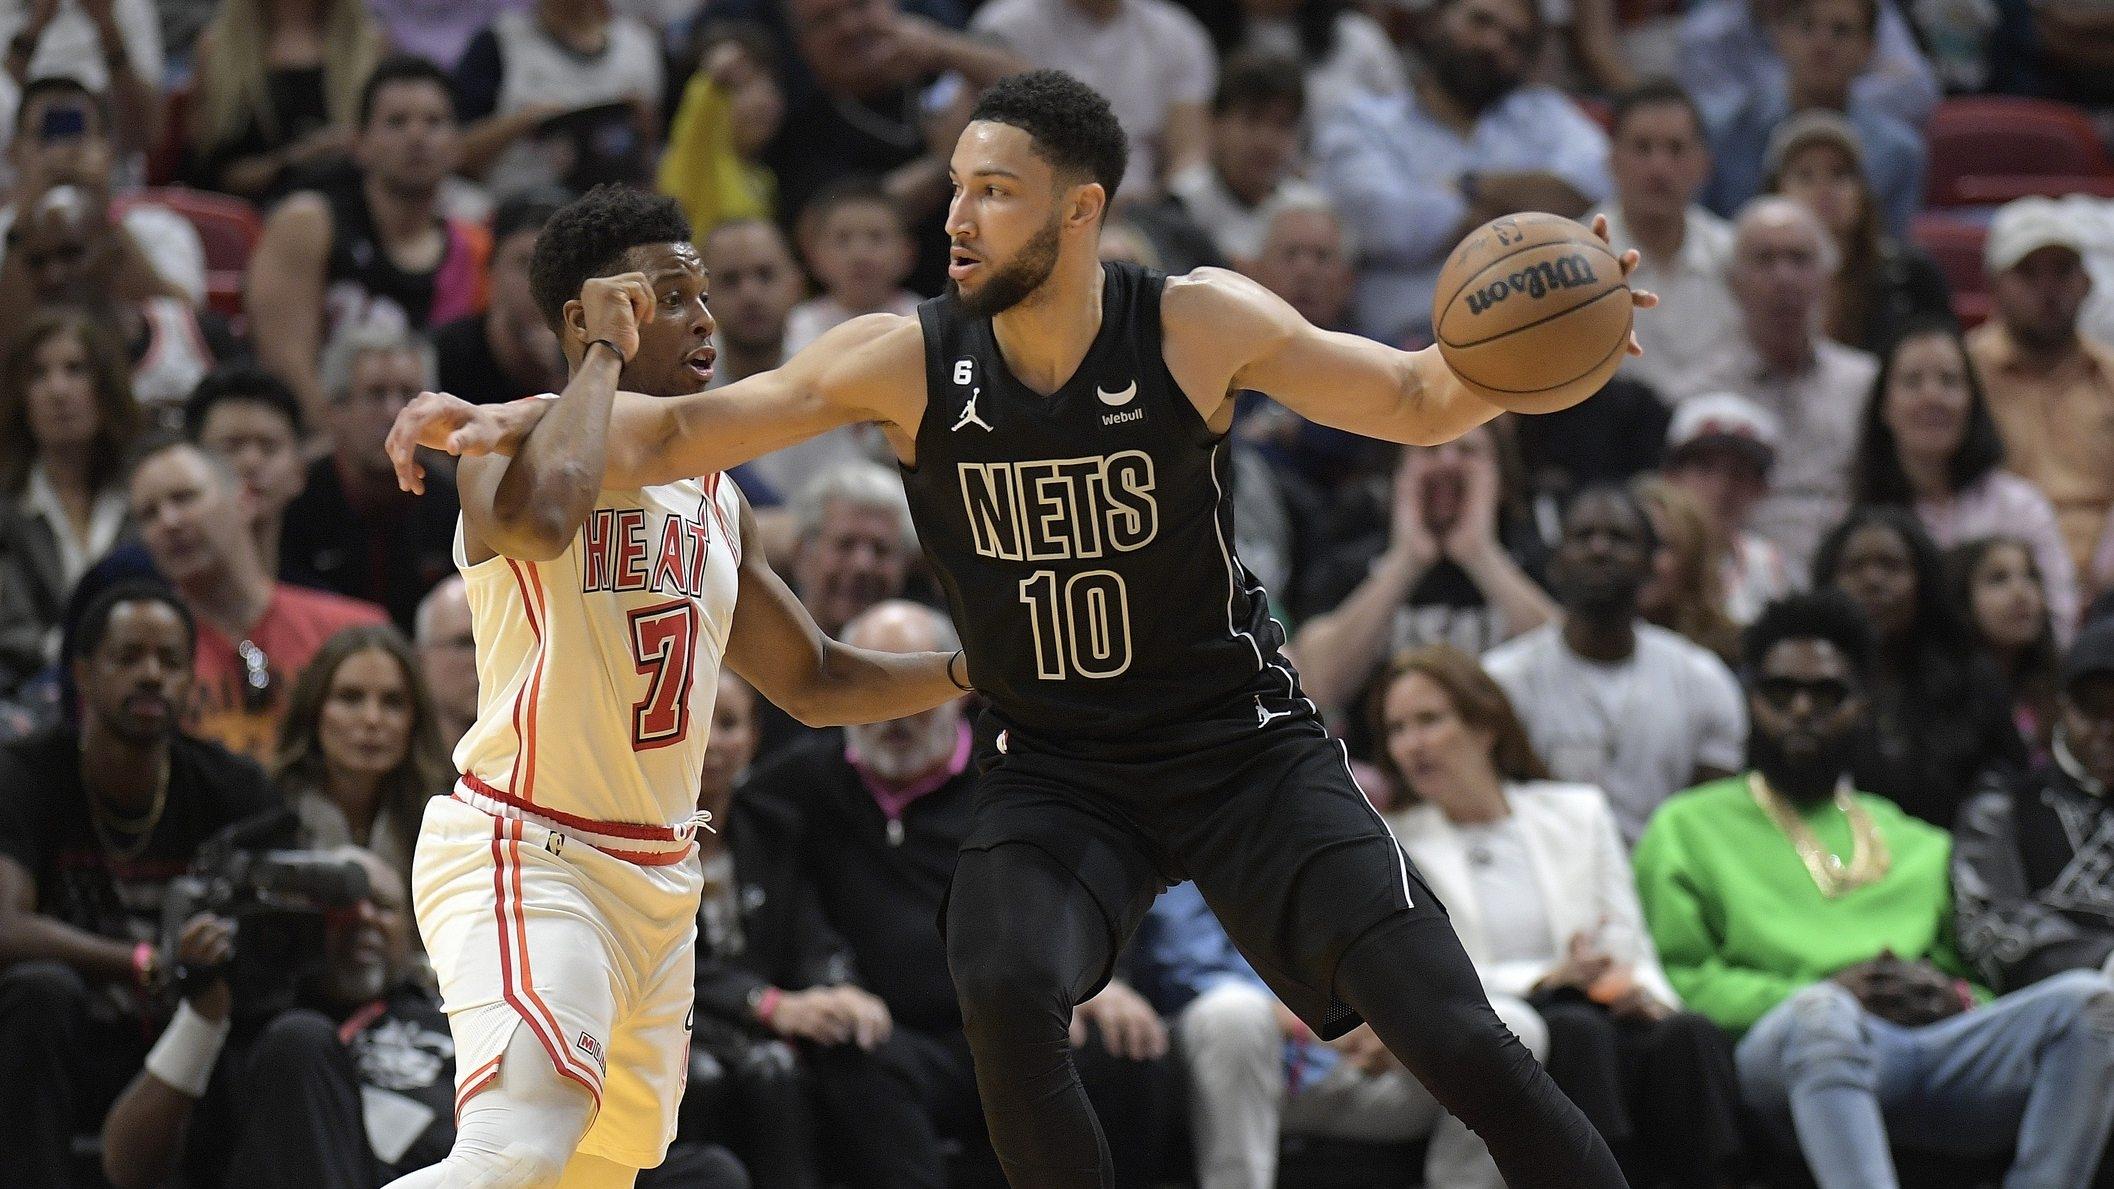 Brooklyn Nets guard Ben Simmons uses his arms to keep Miami Heat guard Kyle Lowry from the ball. / Michael Laughlin-USA TODAY Sports